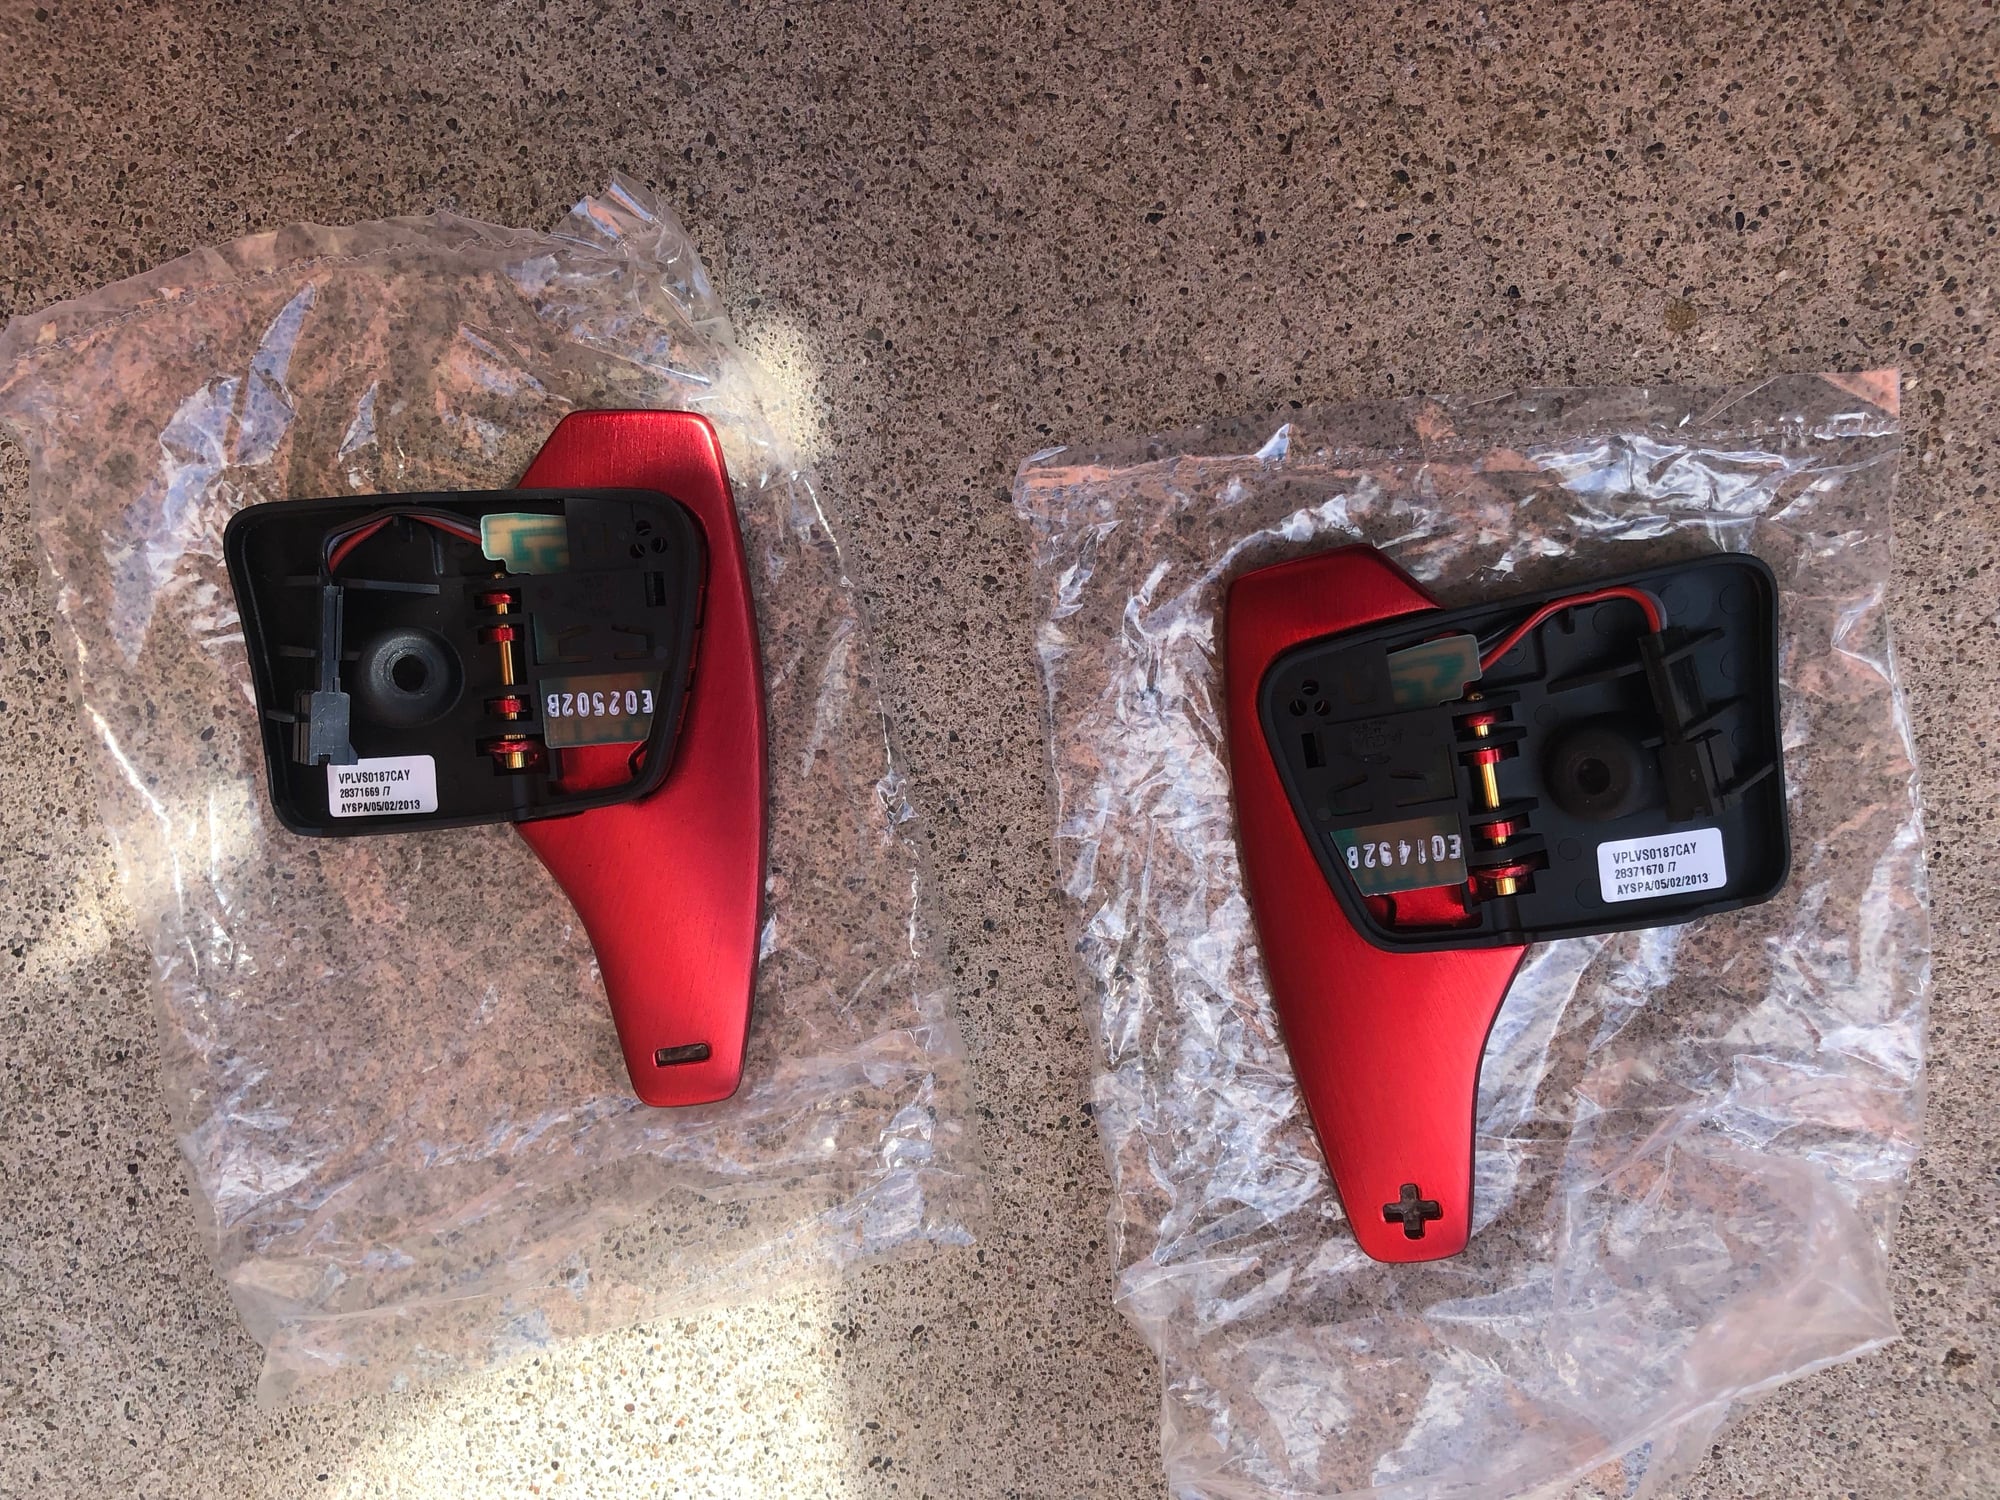 Interior/Upholstery - OEM Red Aluminum Paddle Shifters - Used - All Years Jaguar F-Type - Burlingame, CA 94010, United States